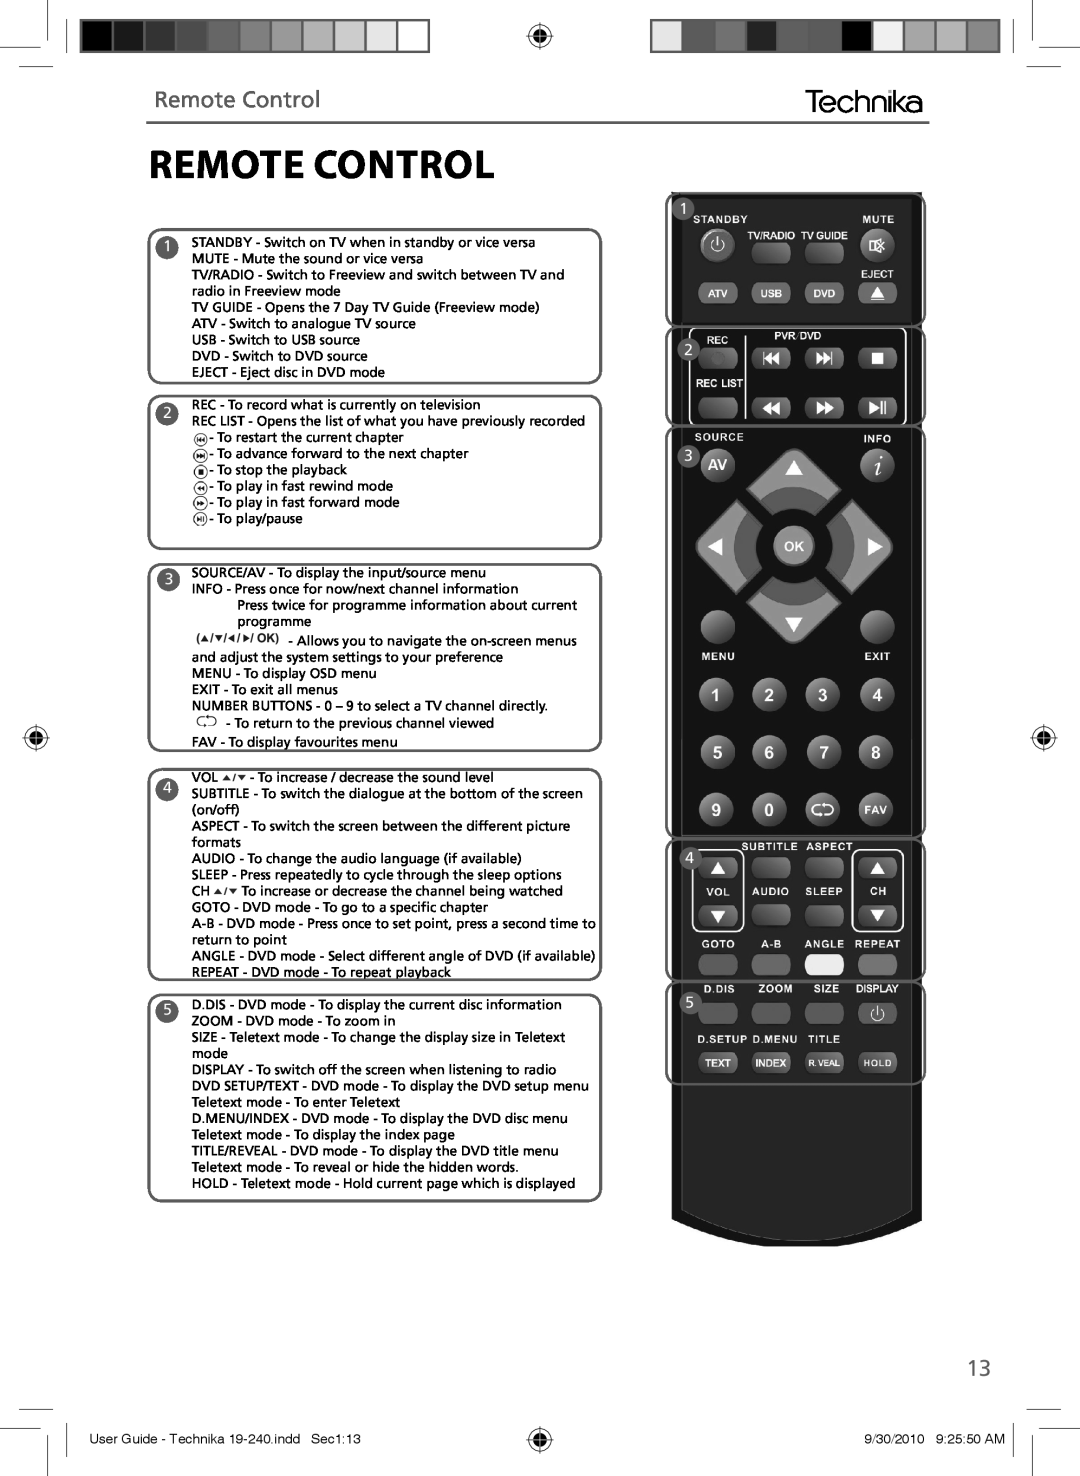 Technika LCD 19-240 manual Remote Control, D.DIS - DVD mode - To display the current disc information 